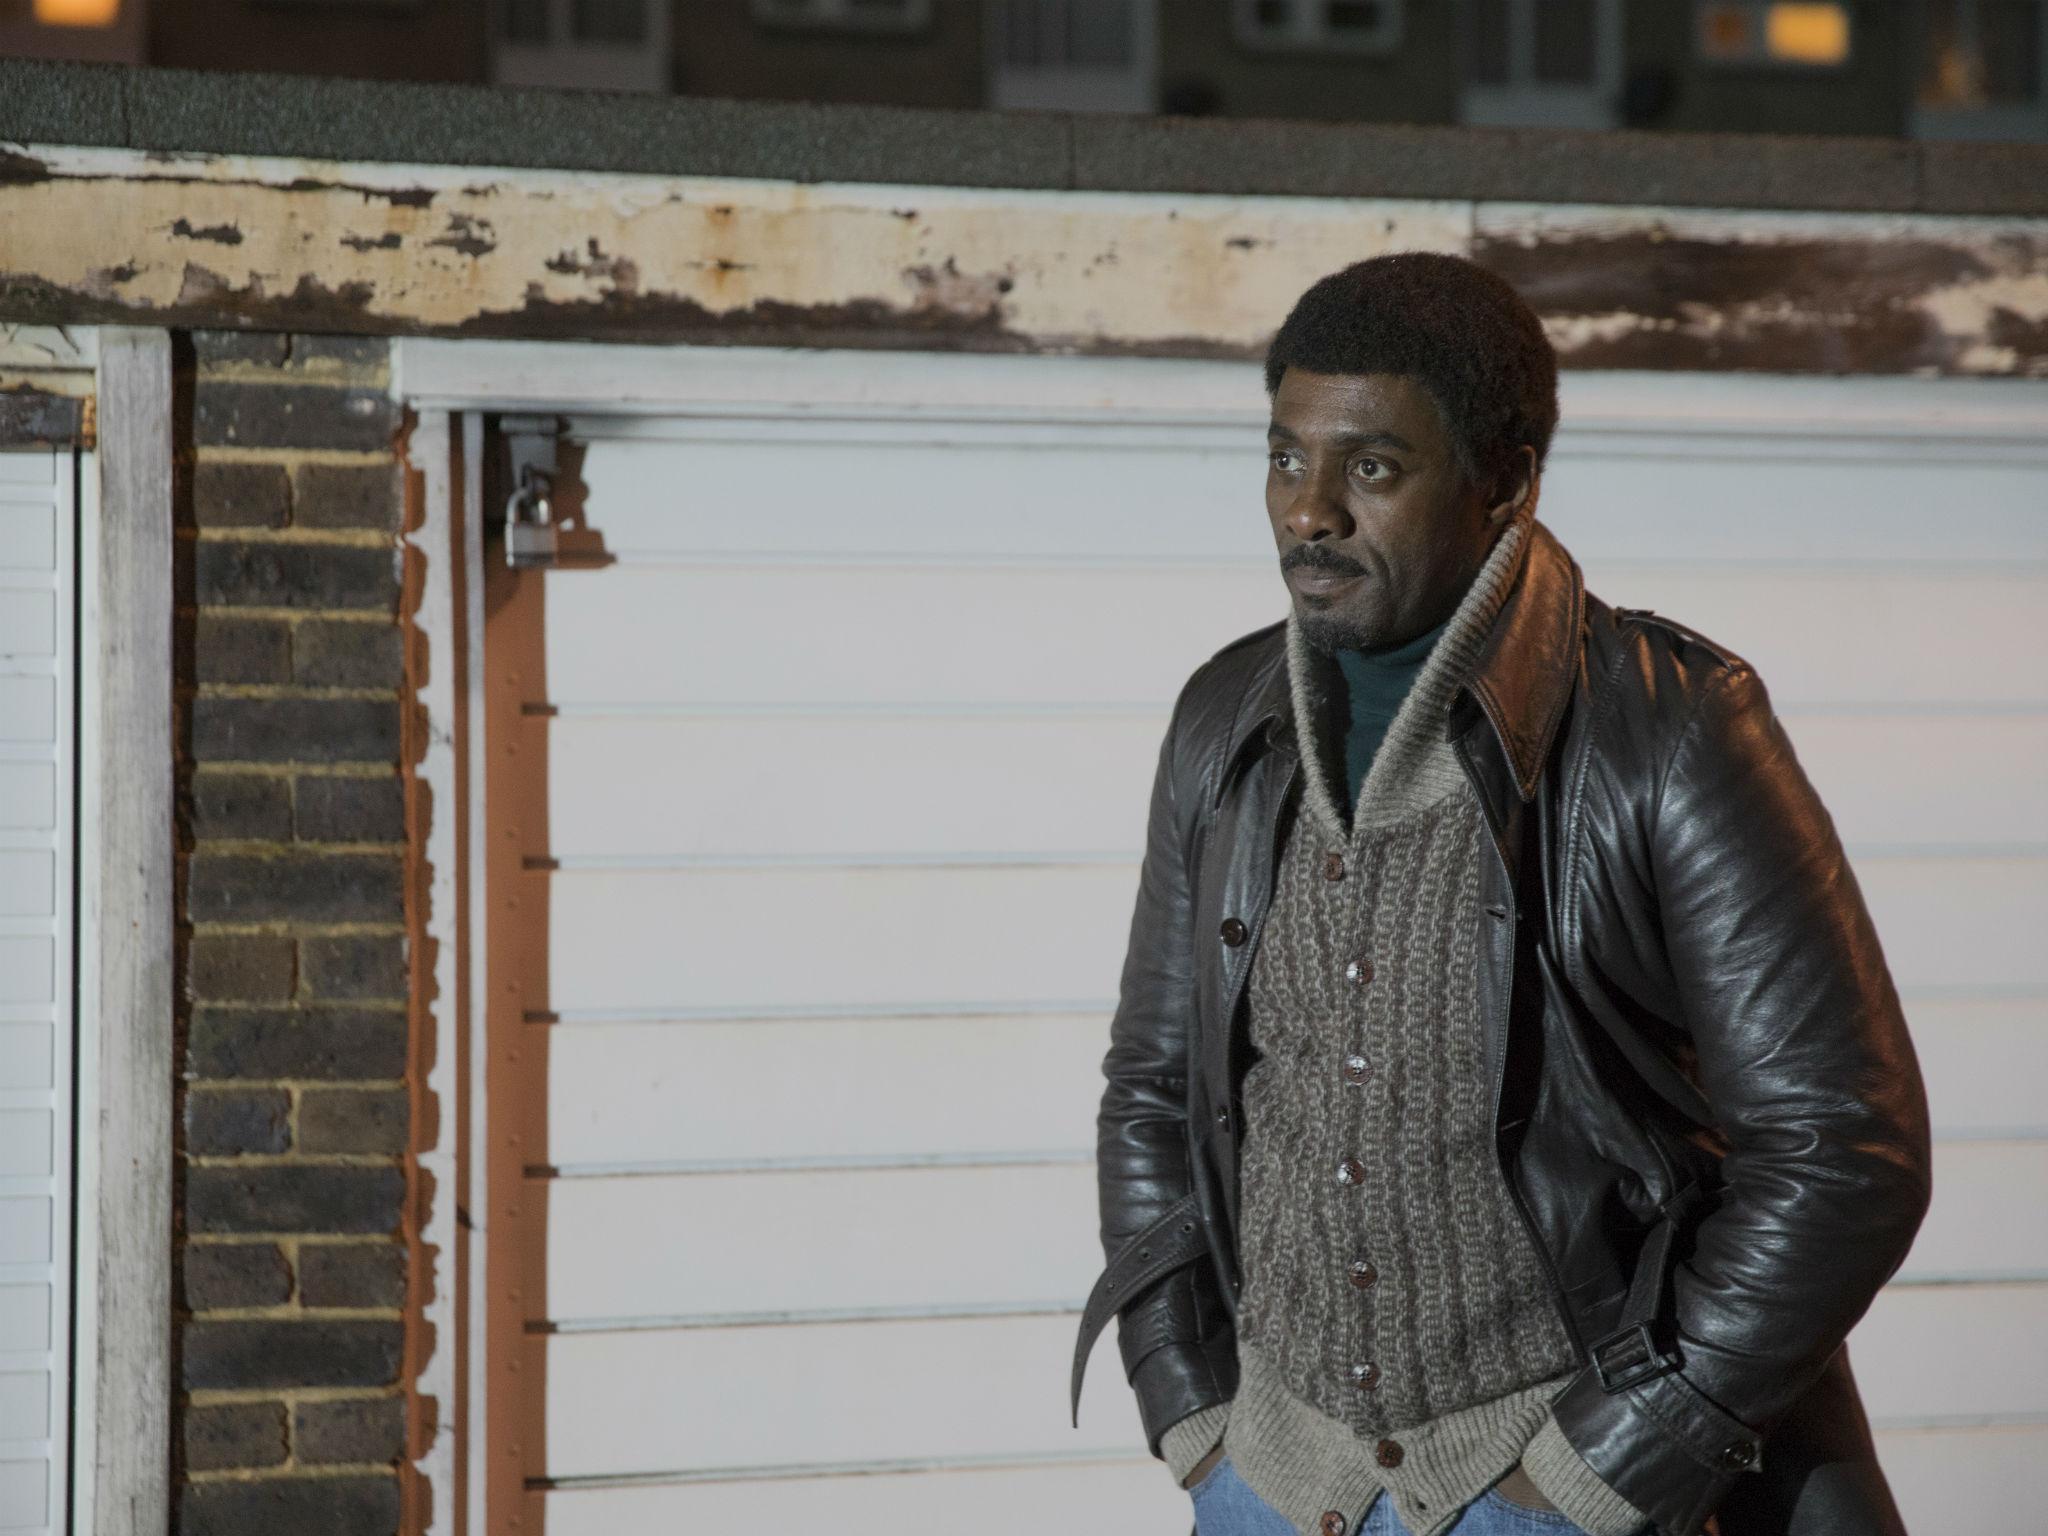 Elba’s sitcom 'In the Long Run' reflects his experience as a youth in east London